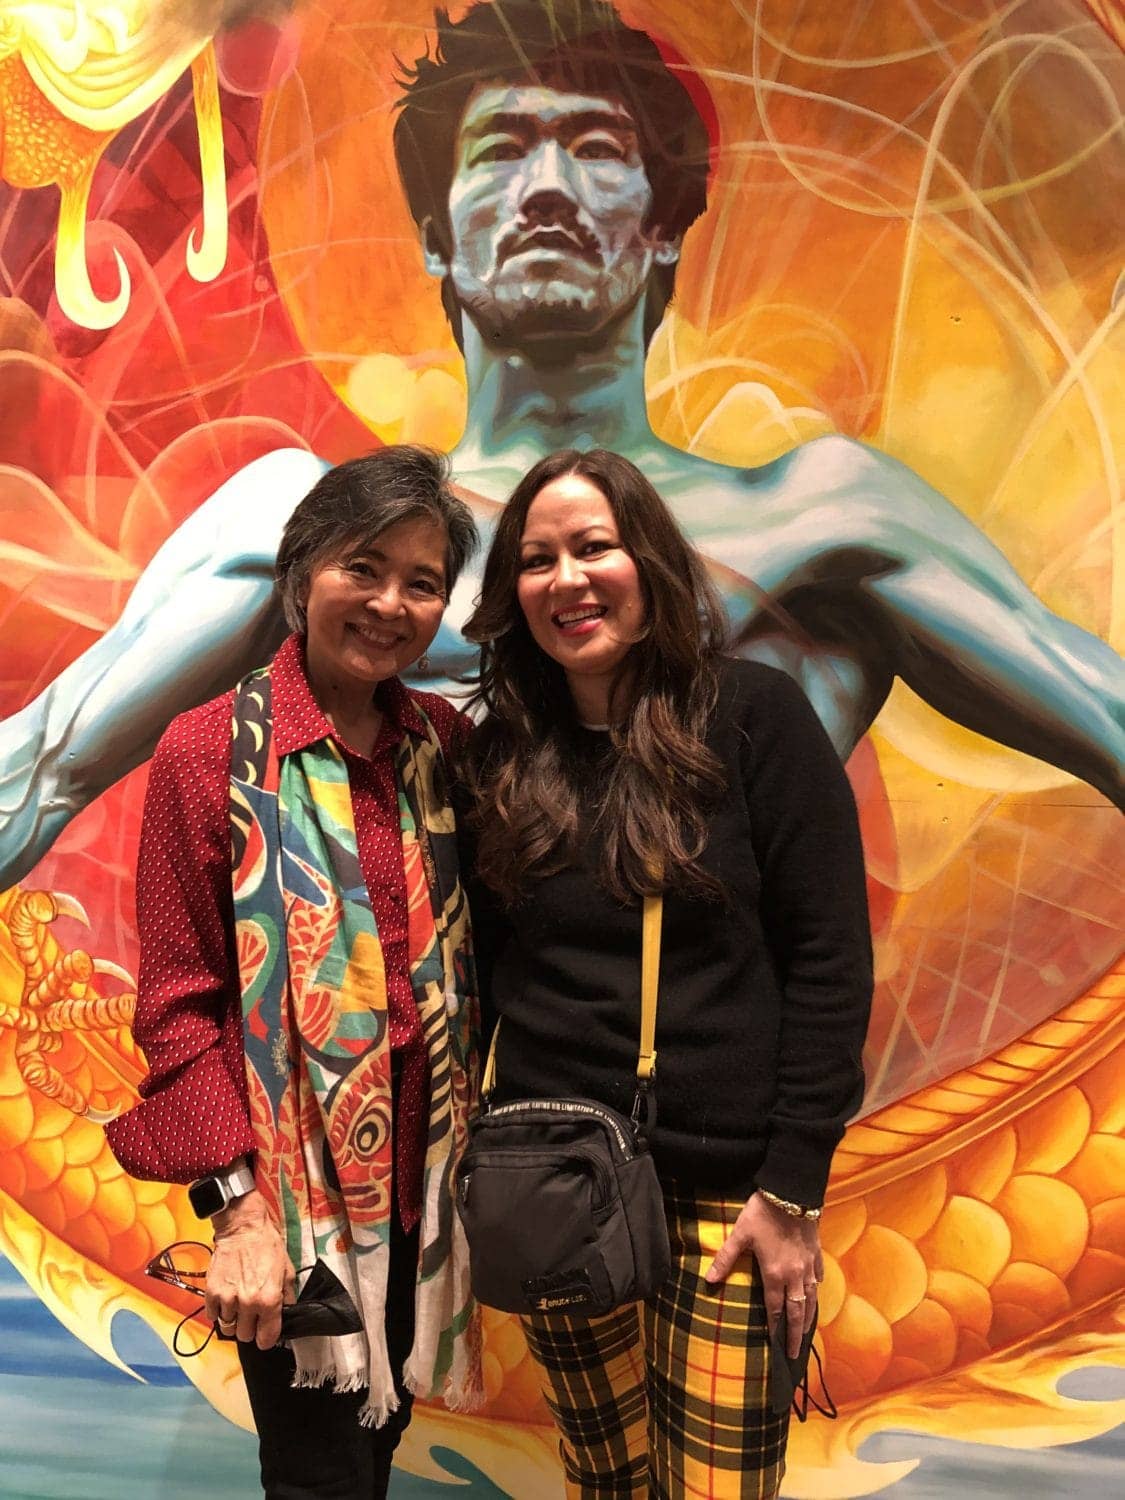 We-Are-Bruce-Lee-Under-the-Sky-One-Family-with-Jane-Chin-and-Shannon-Lee-by-Janice-Lee, San Francisco Chinatown’s upcoming Bruce Lee exhibit celebrates his connection to the Black community, Culture Currents News & Views 